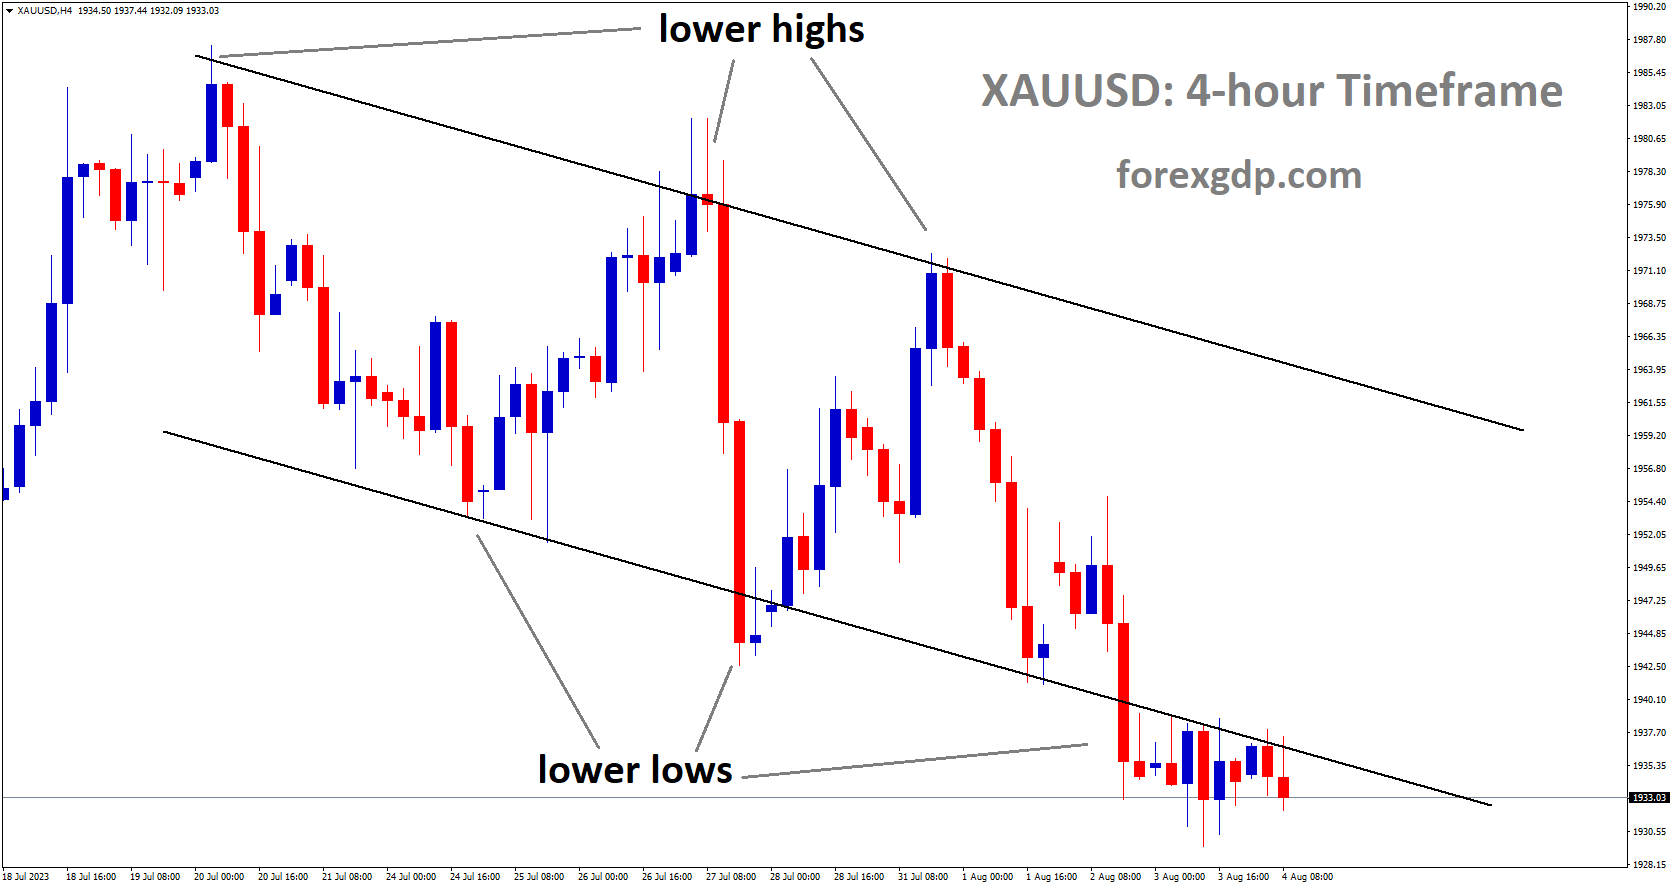 XAUUSD is moving in descending channel and the market has reached lower low area of the channel.